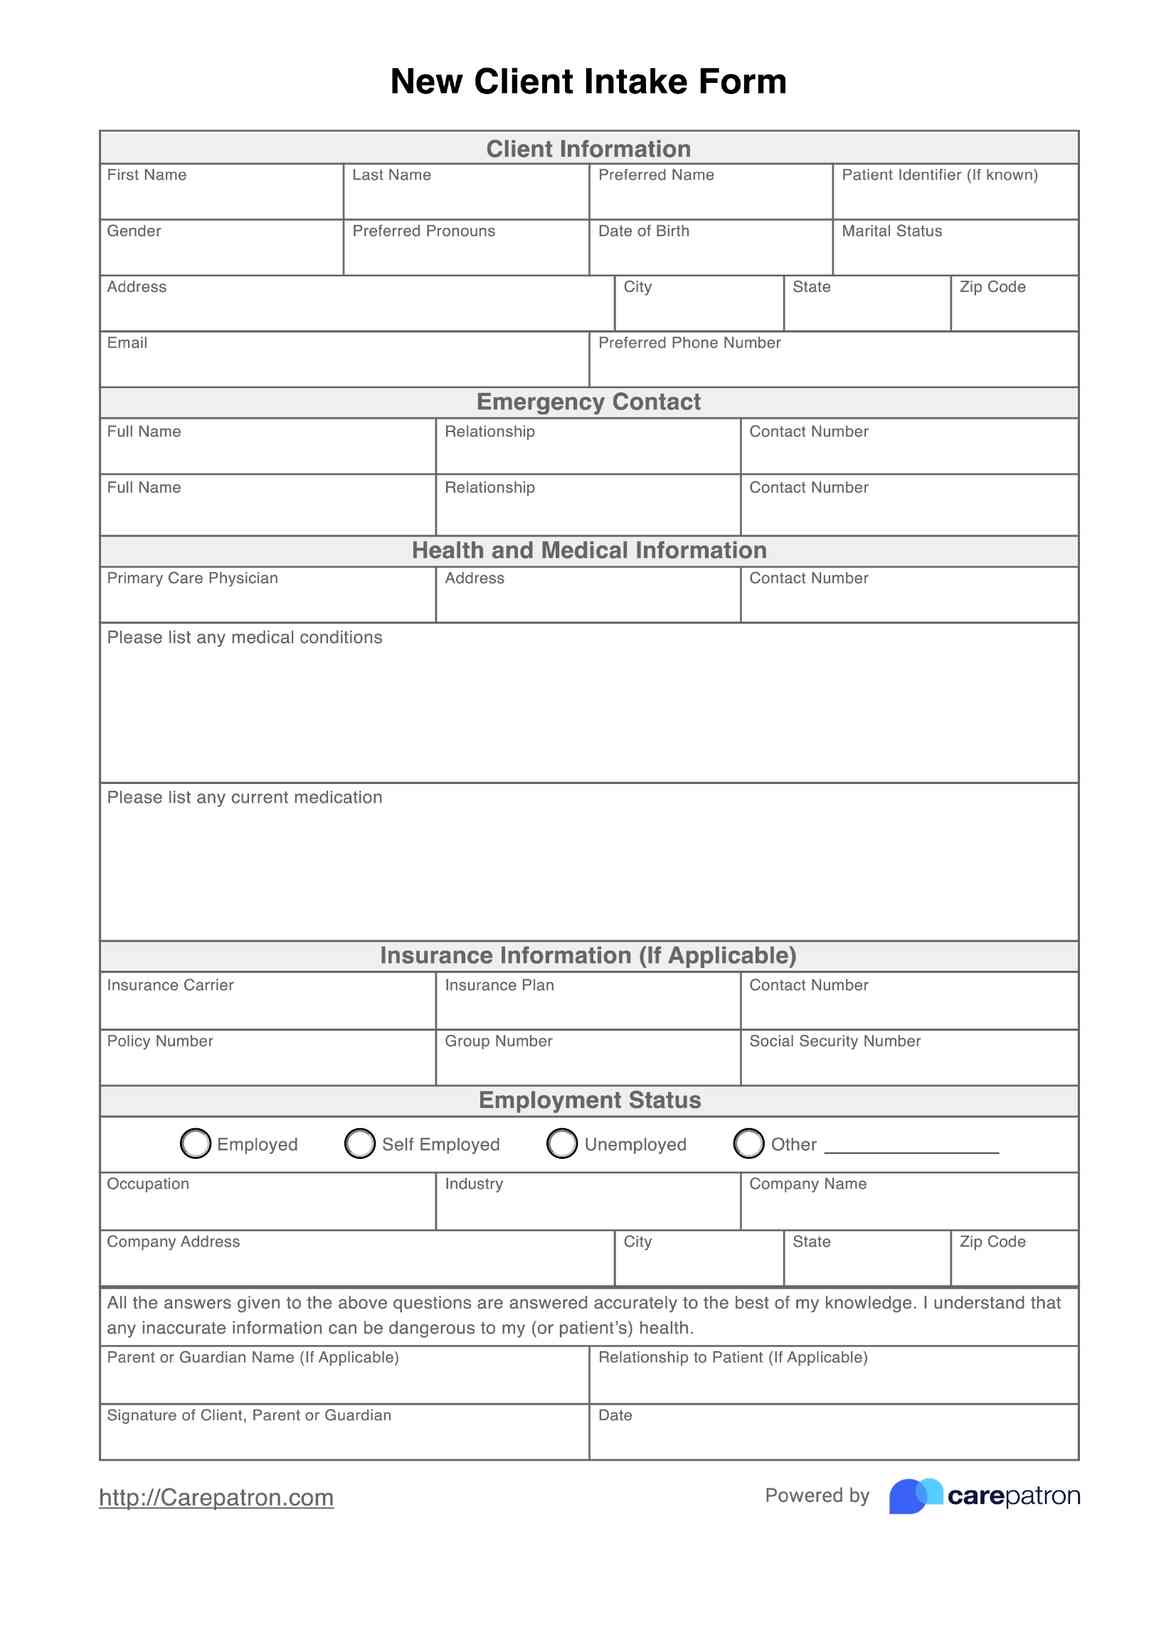 New Client Intake Form PDF Example